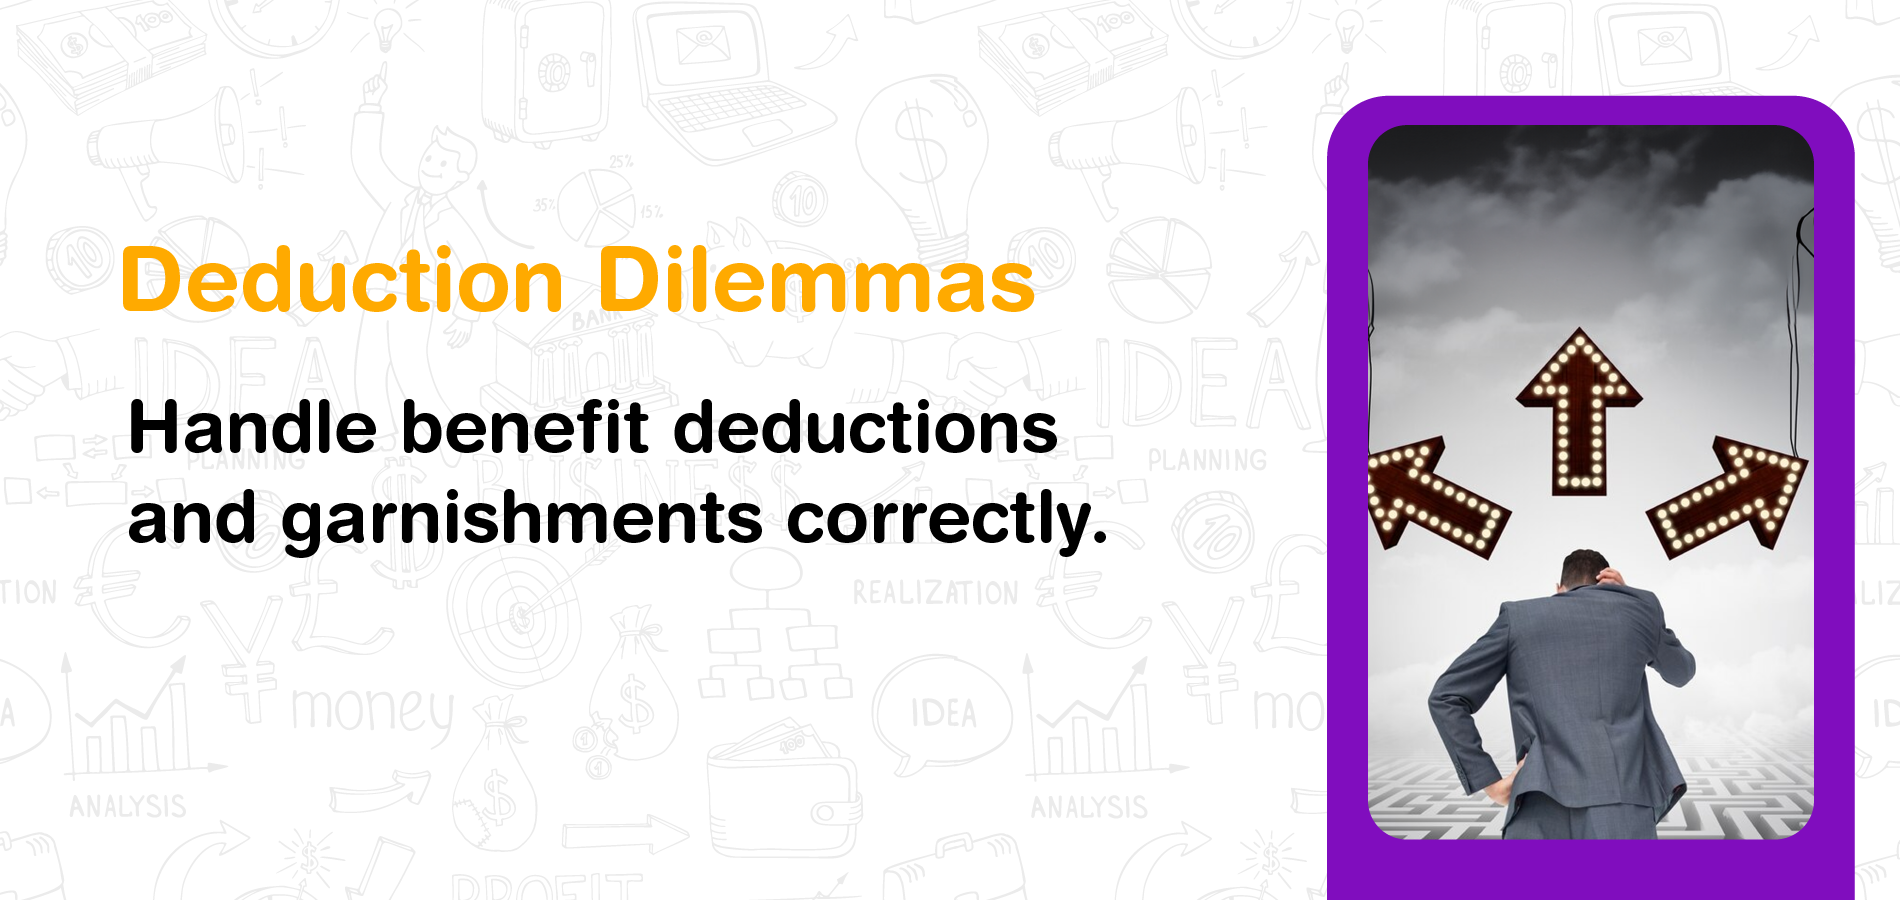 Deduction Dilemmas: The Art of Accurate Deductions